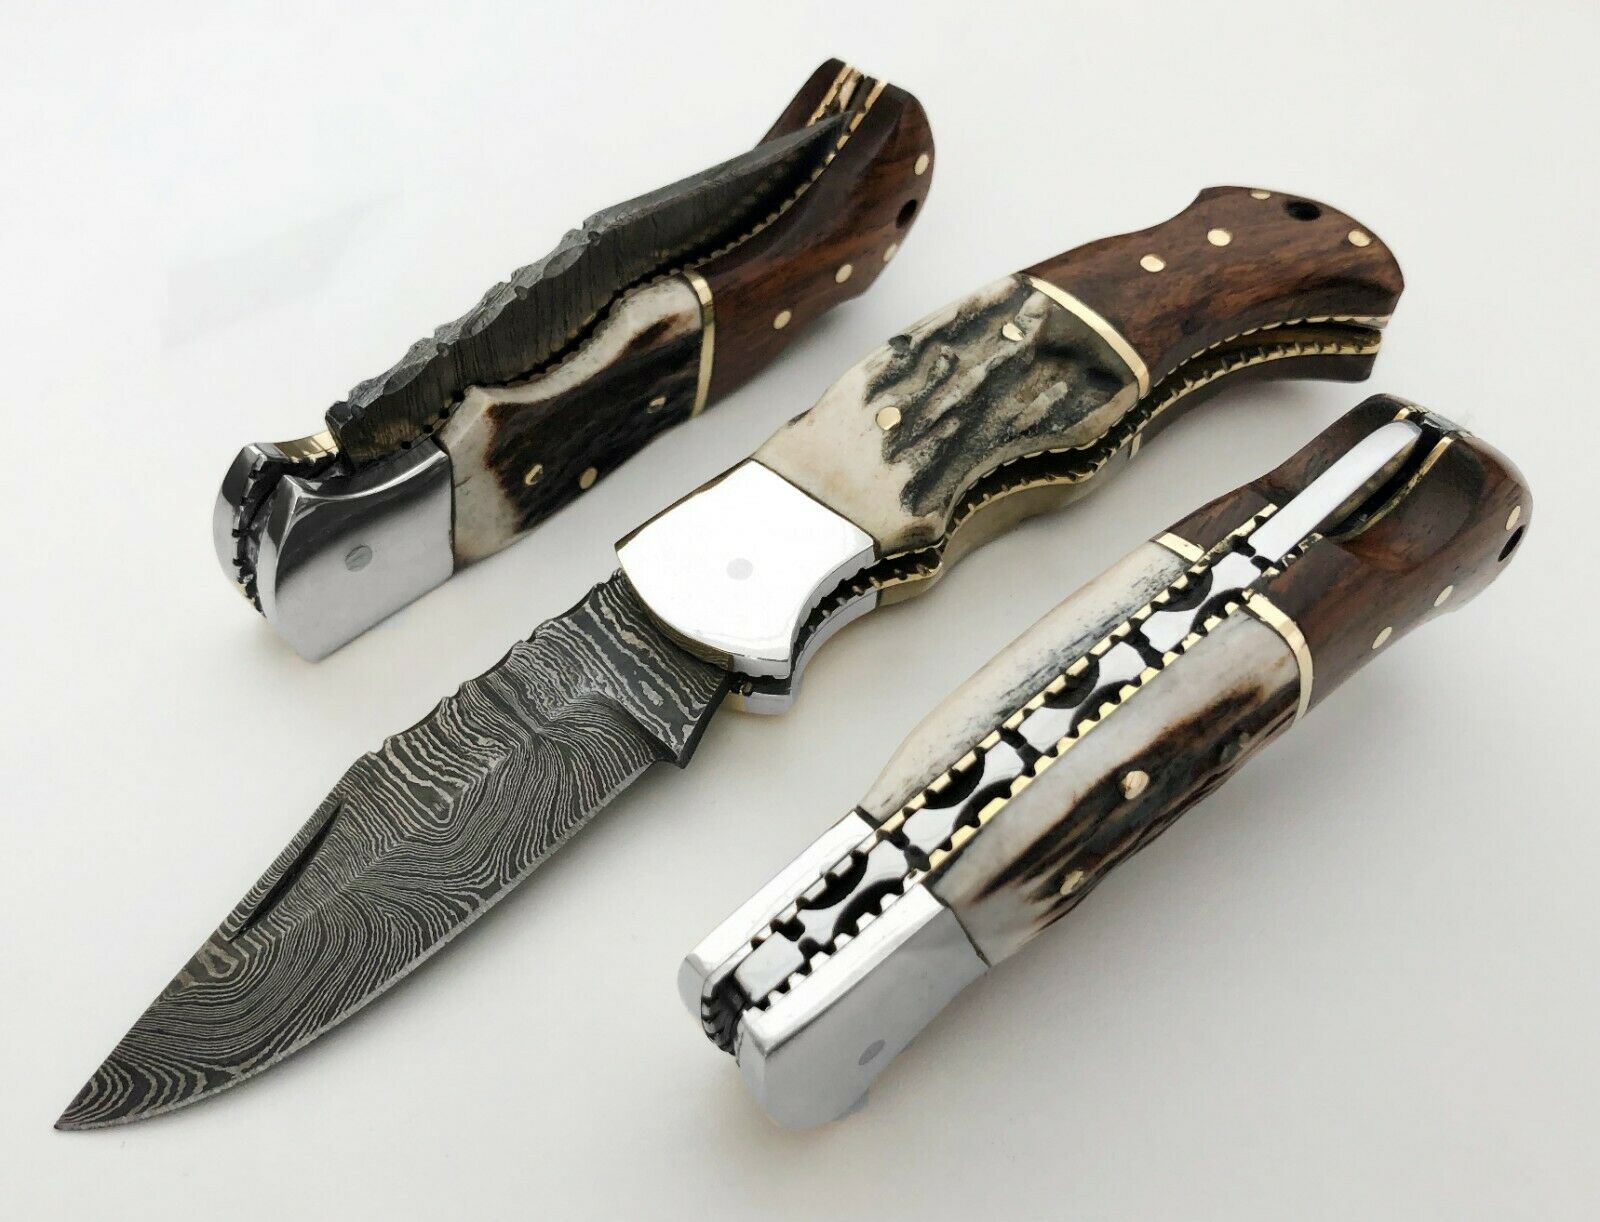 Damascus Steel Folding Pocket Knife 6.5" Stag Antler Handle With Leather Sheath